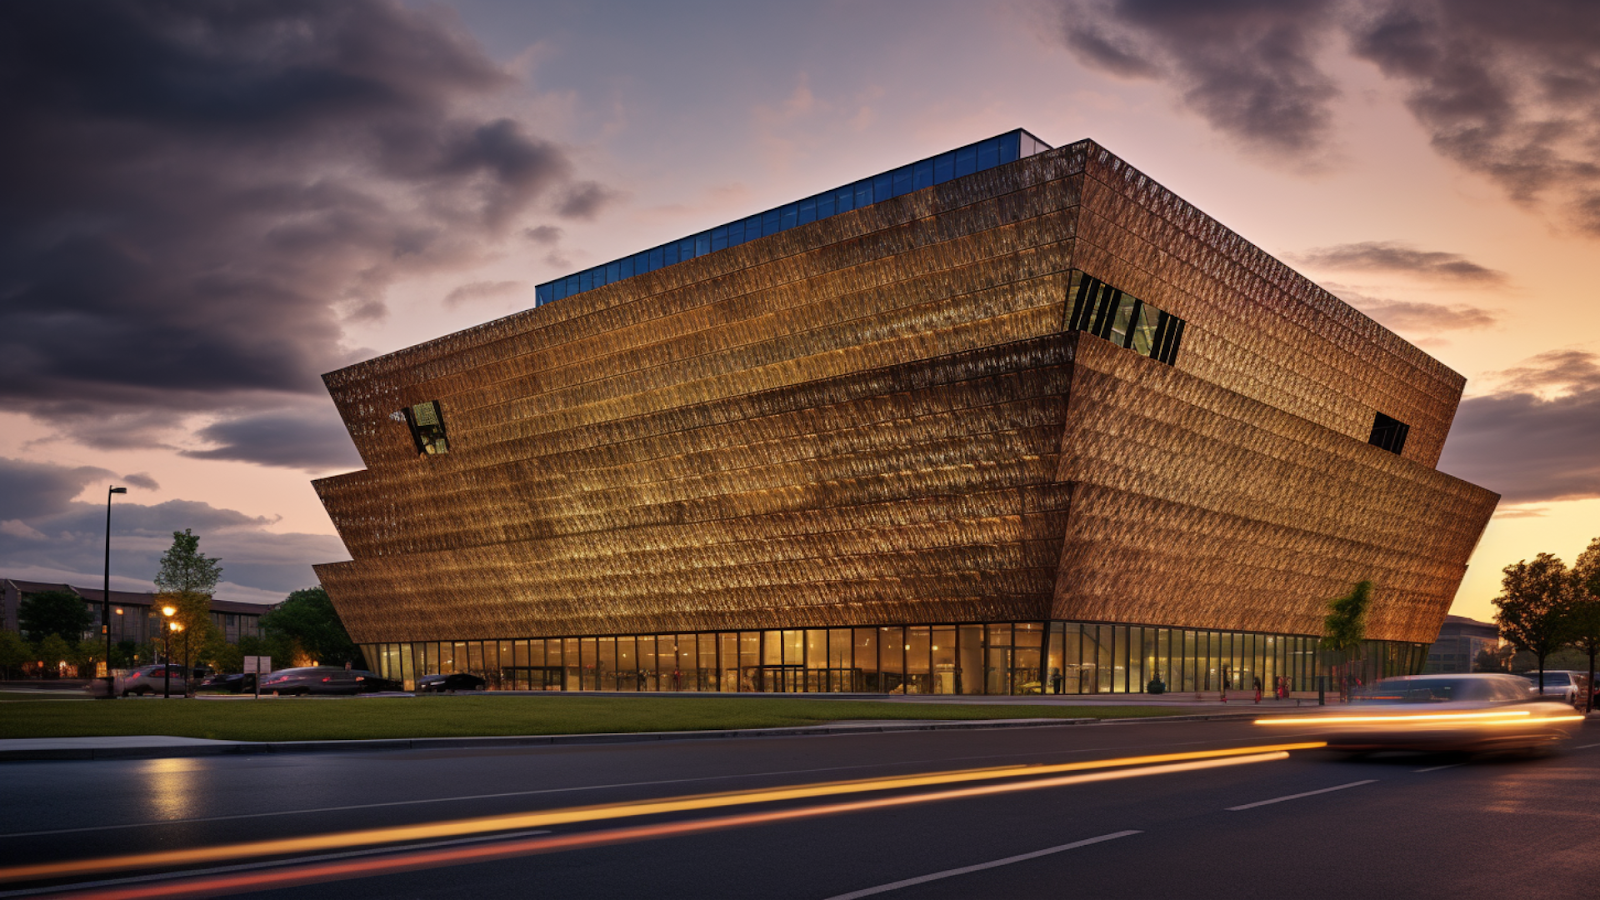 The National Museum of African American History and Culture in Washington D.C. with its distinctive bronze-colored design and brutalist body.